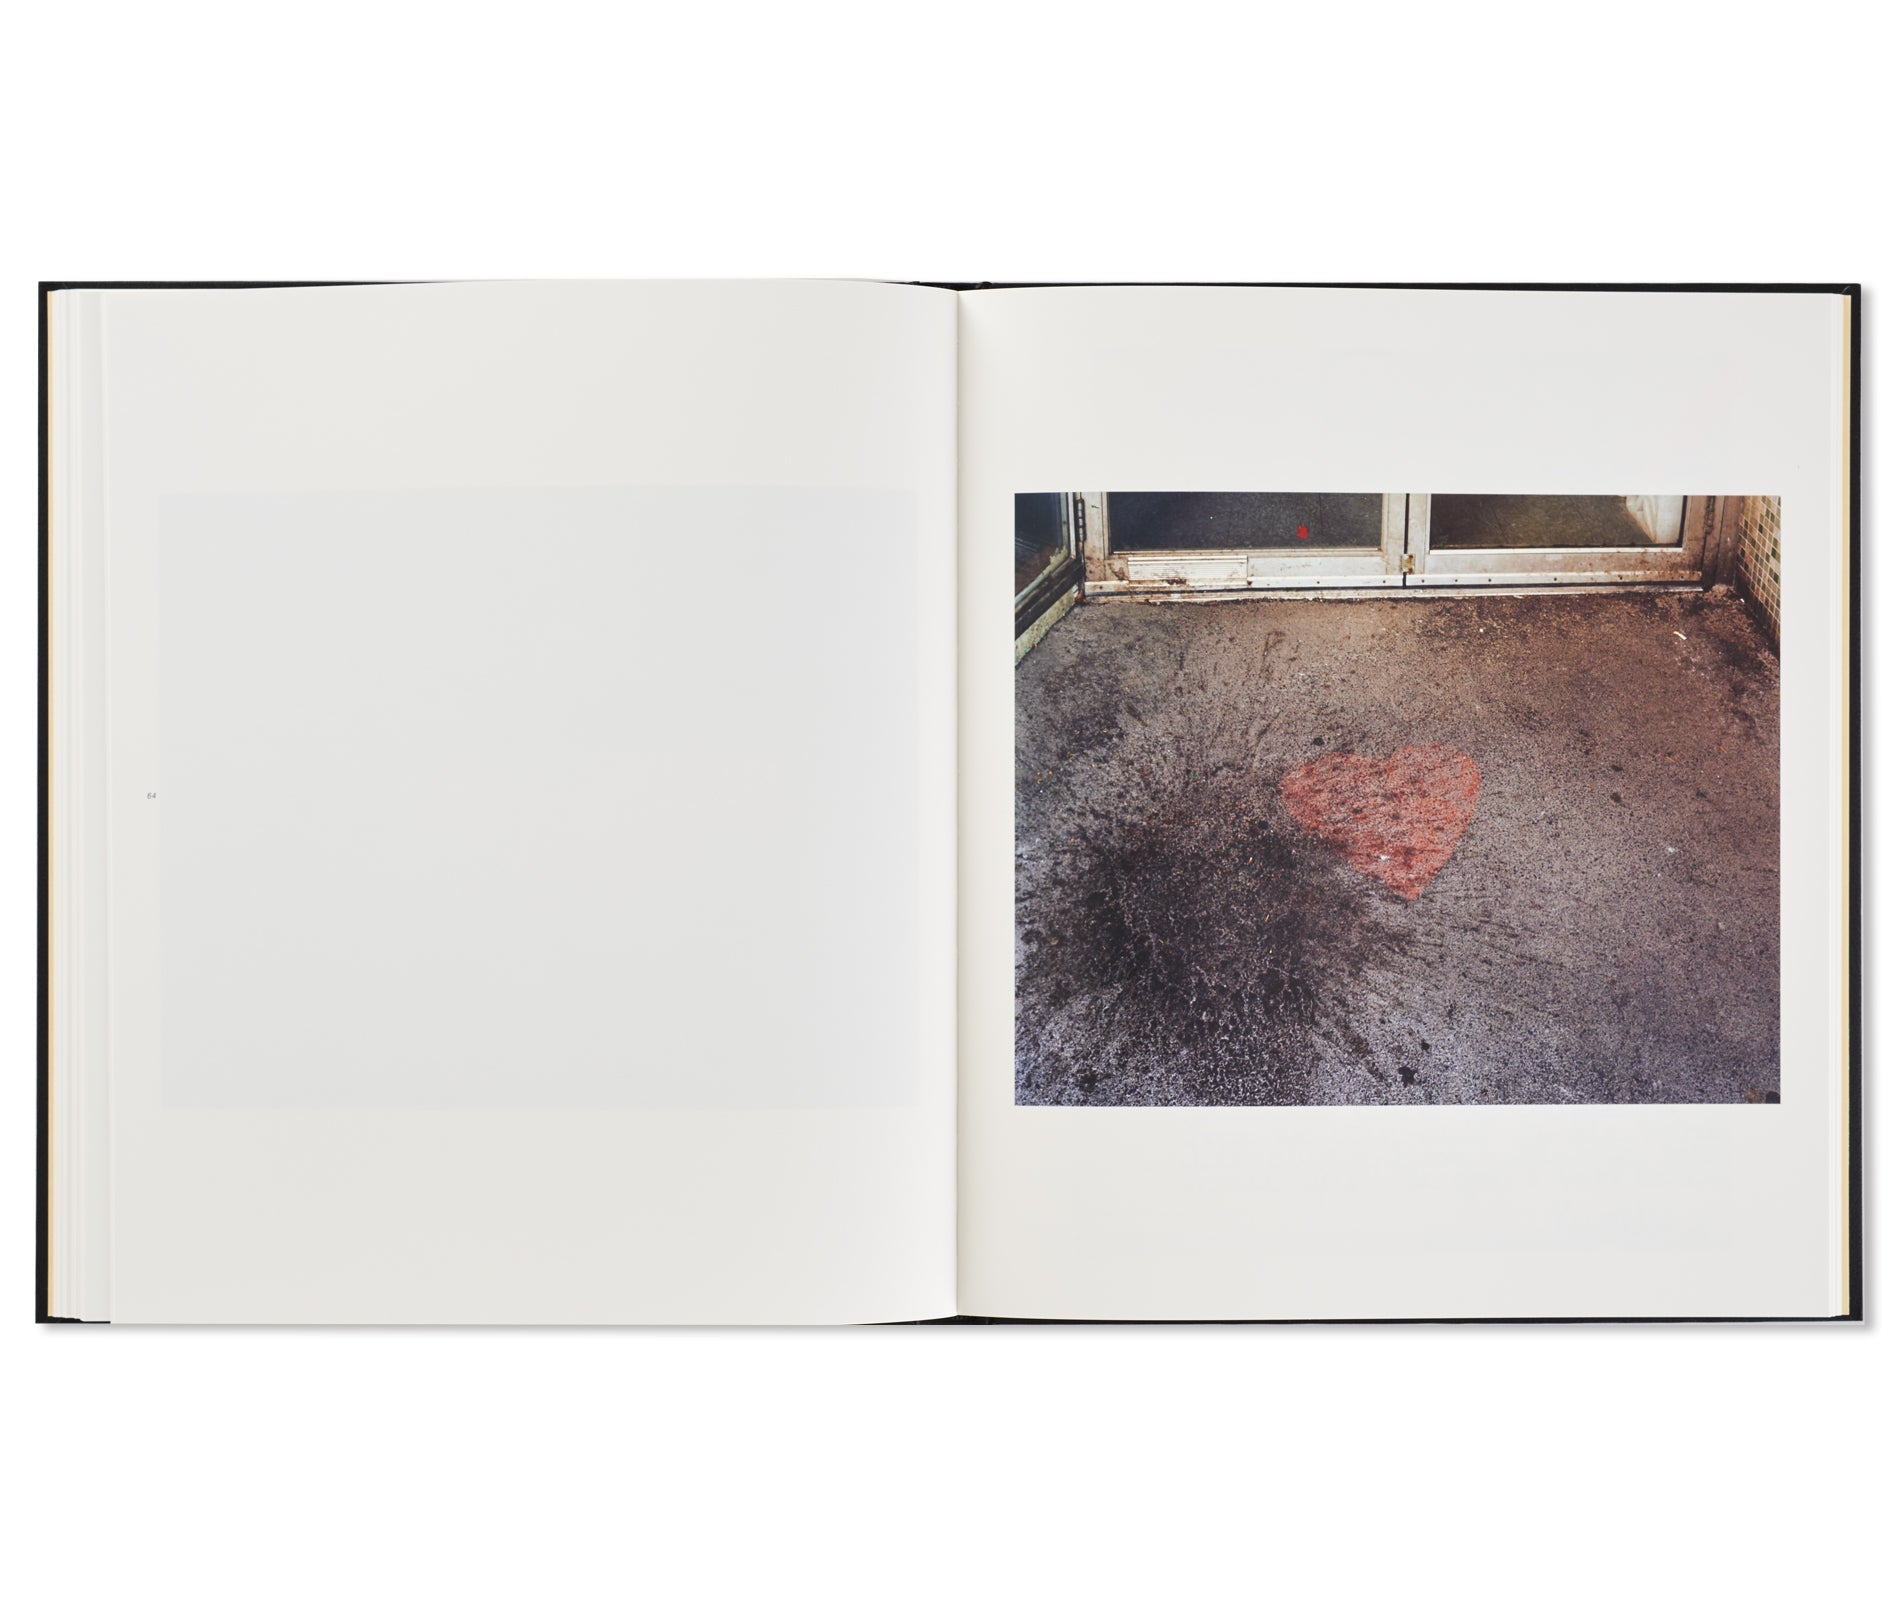 NIAGARA by Alec Soth [FIRST EDITION, SECOND PRINTING]